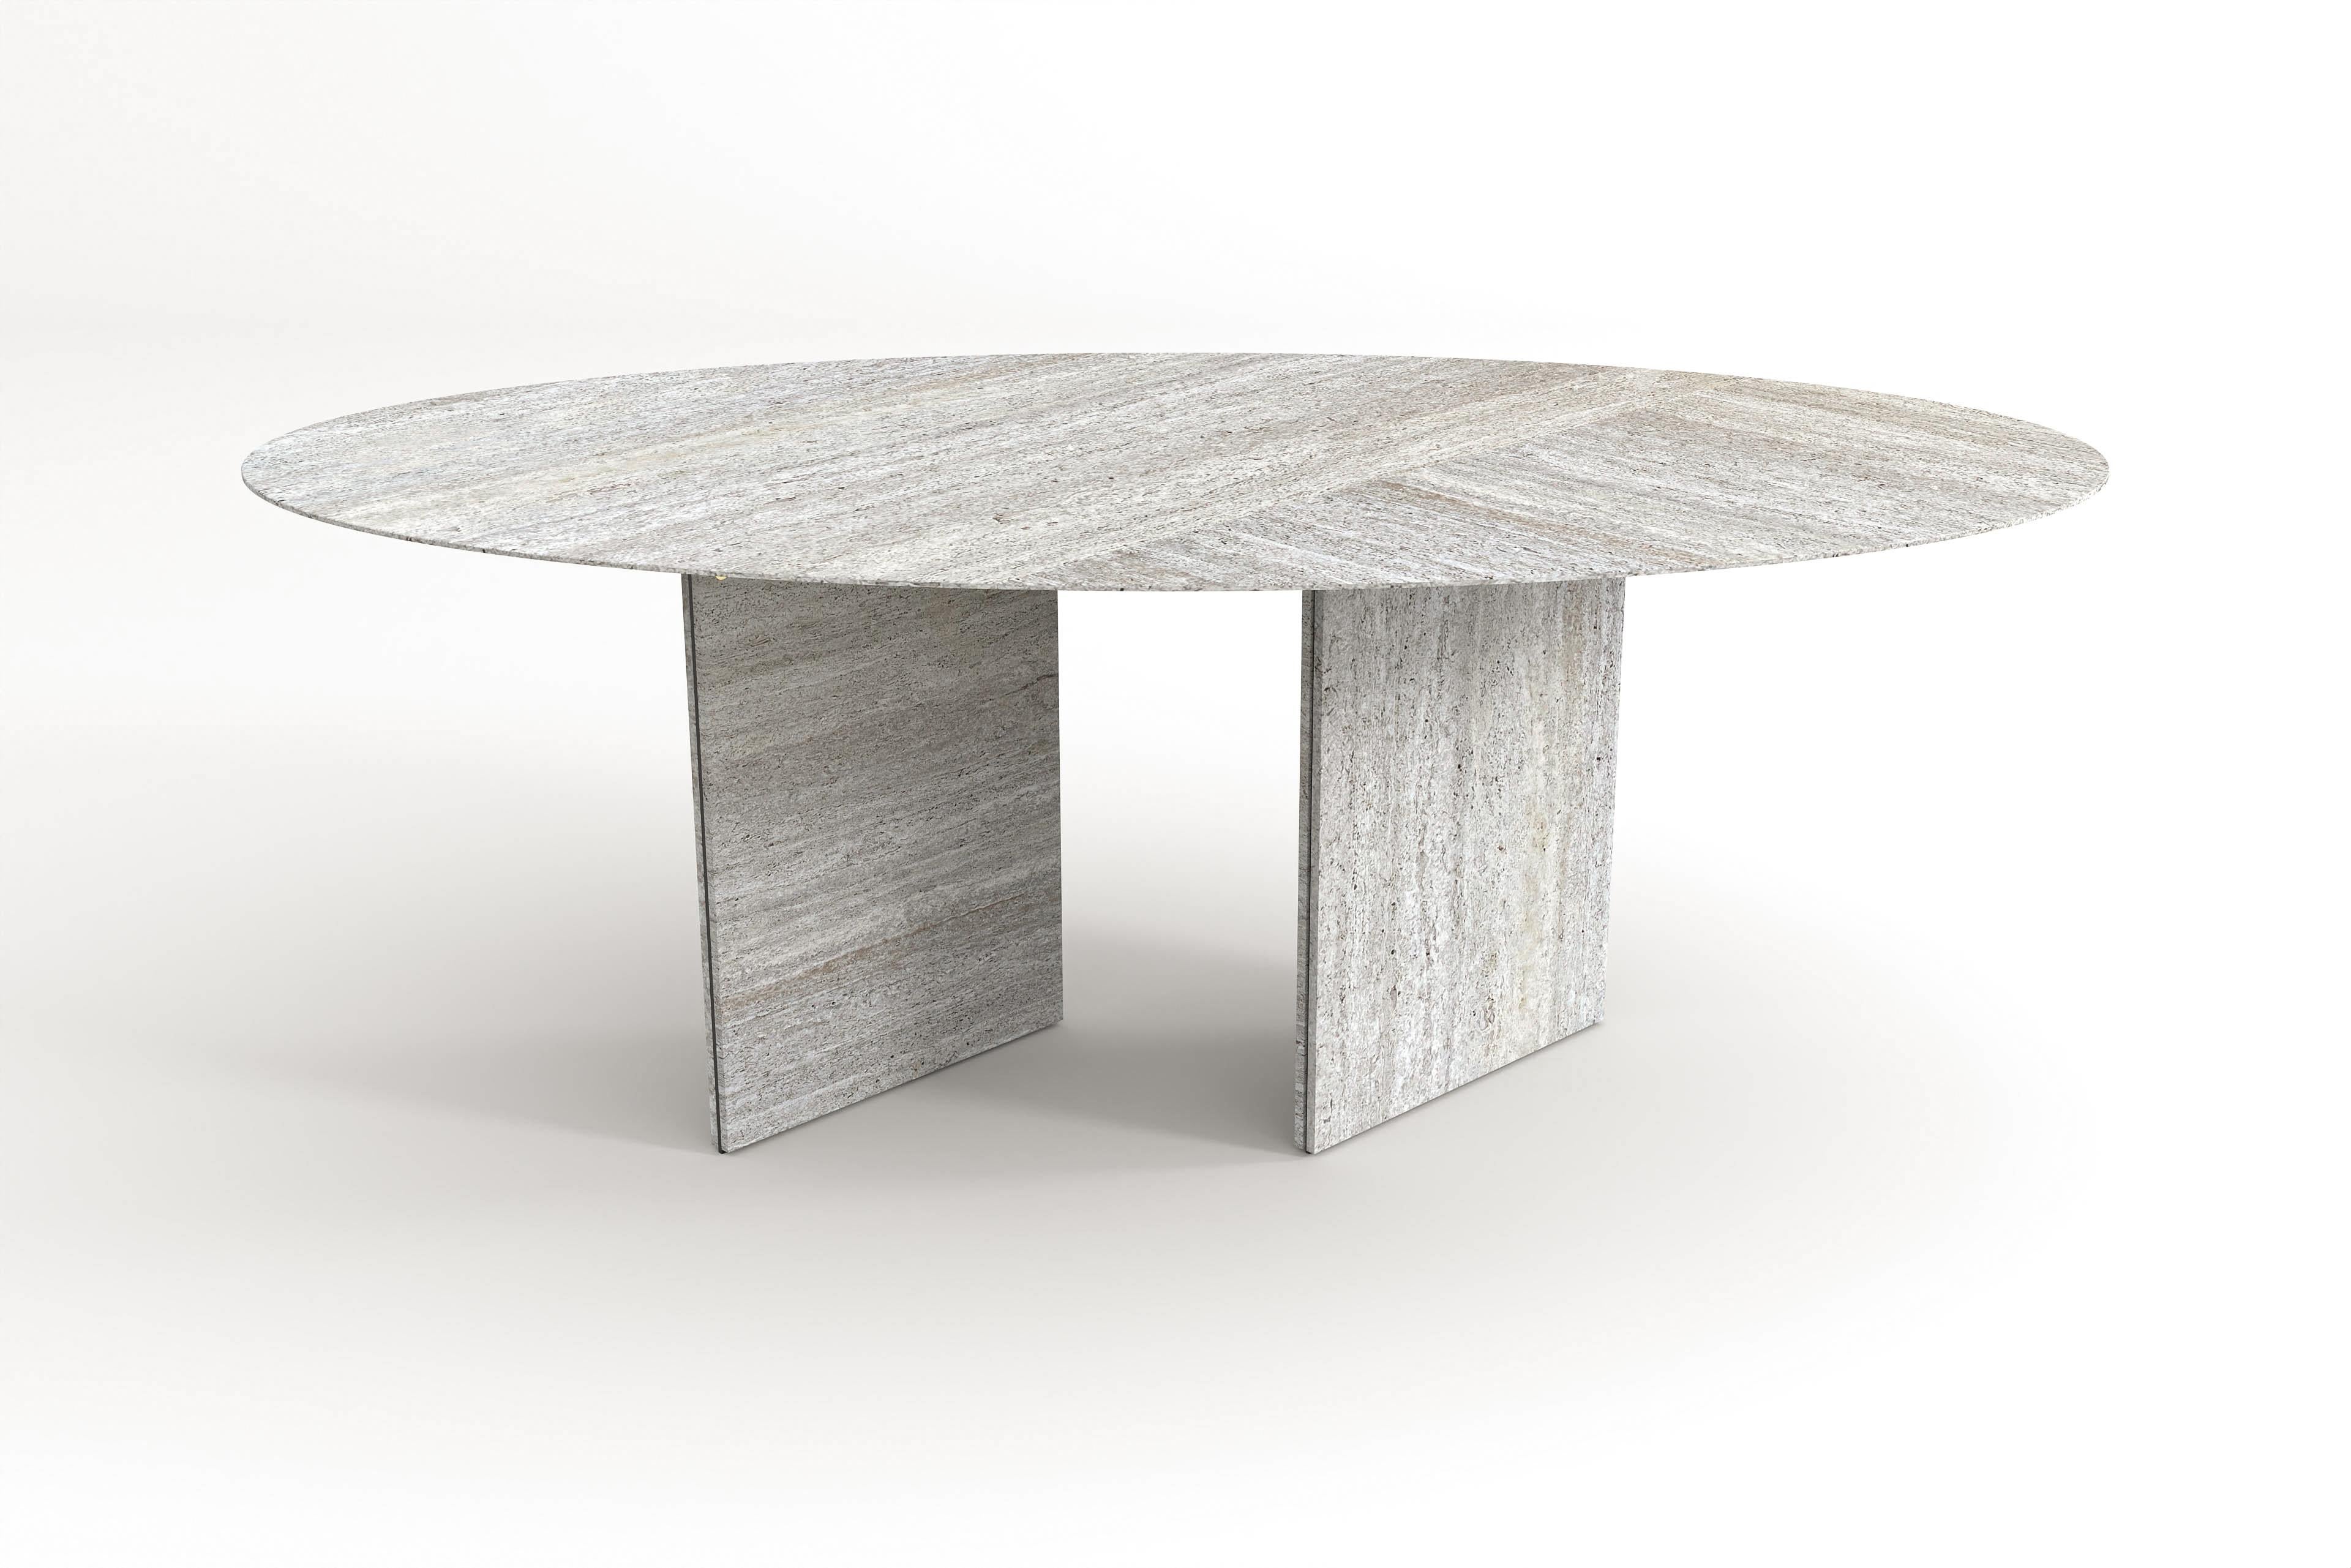 Ellipse 02 is a redesign of our classic ellipse tables. It evolved into a new, intriguing composition without losing the core (shape) of the original. This table just demands to be looked at over and over again. It fascinates by the contrasts of